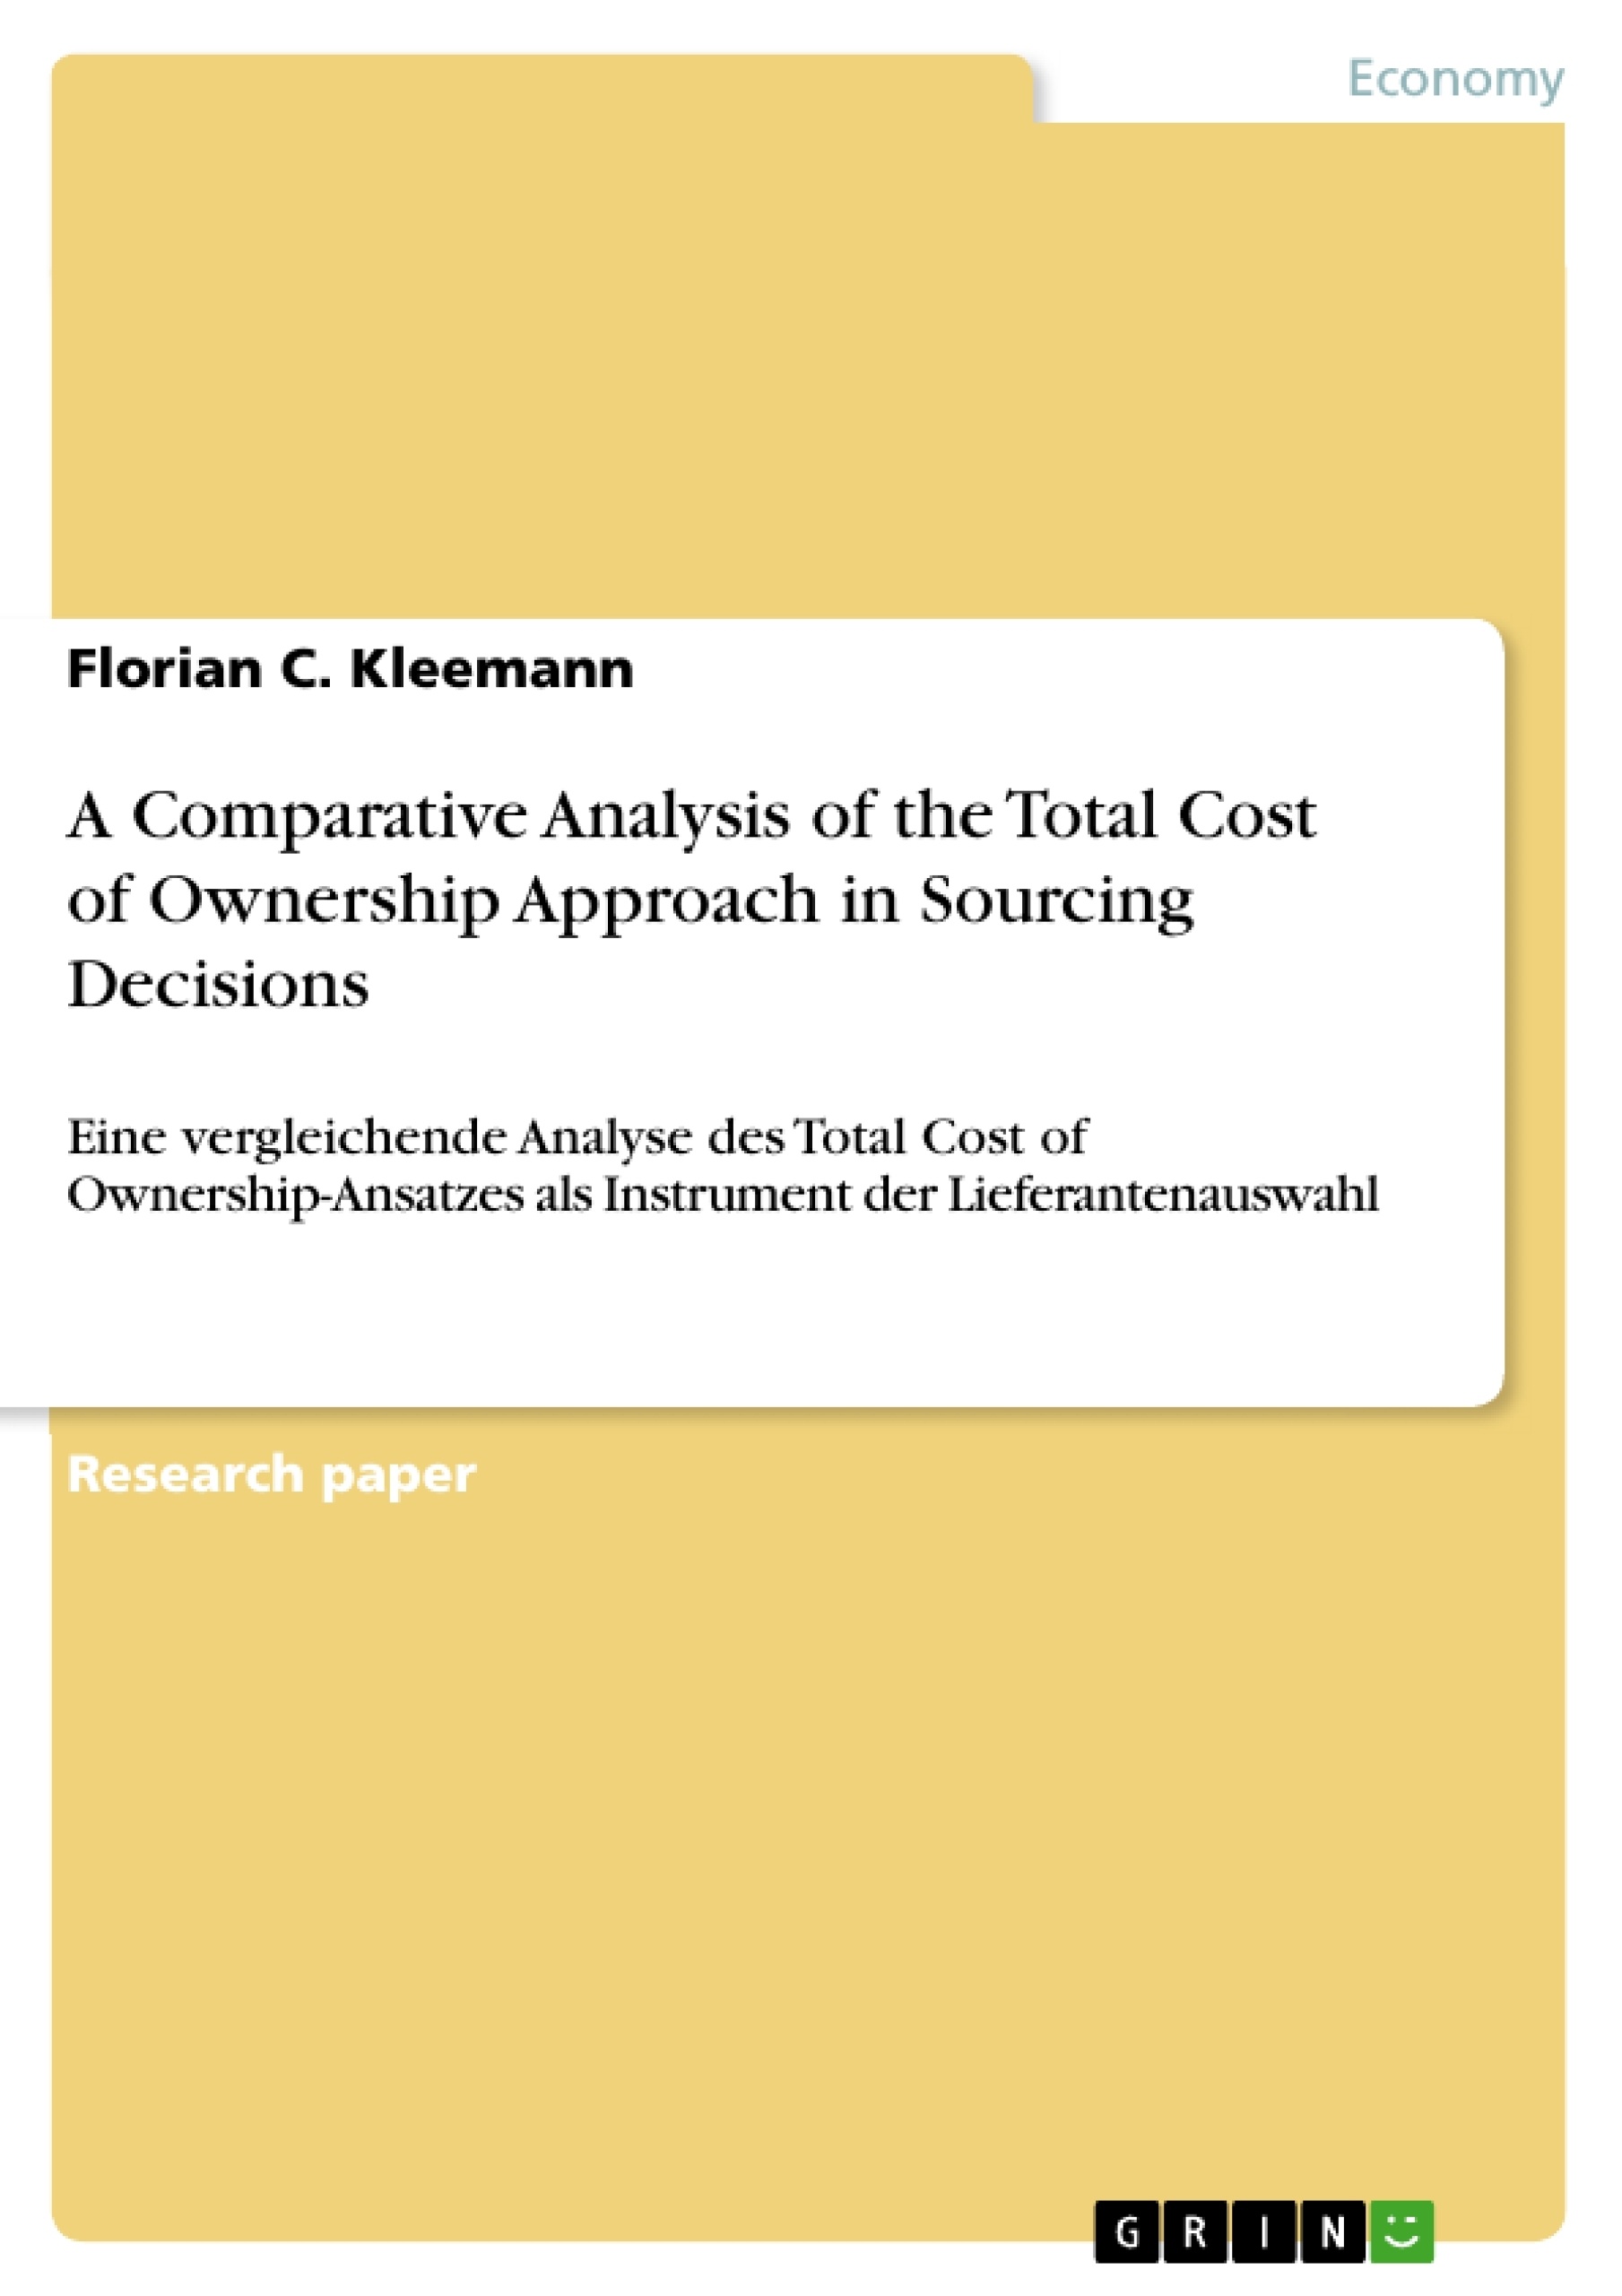 Título: A Comparative Analysis of the Total Cost of Ownership Approach in Sourcing Decisions